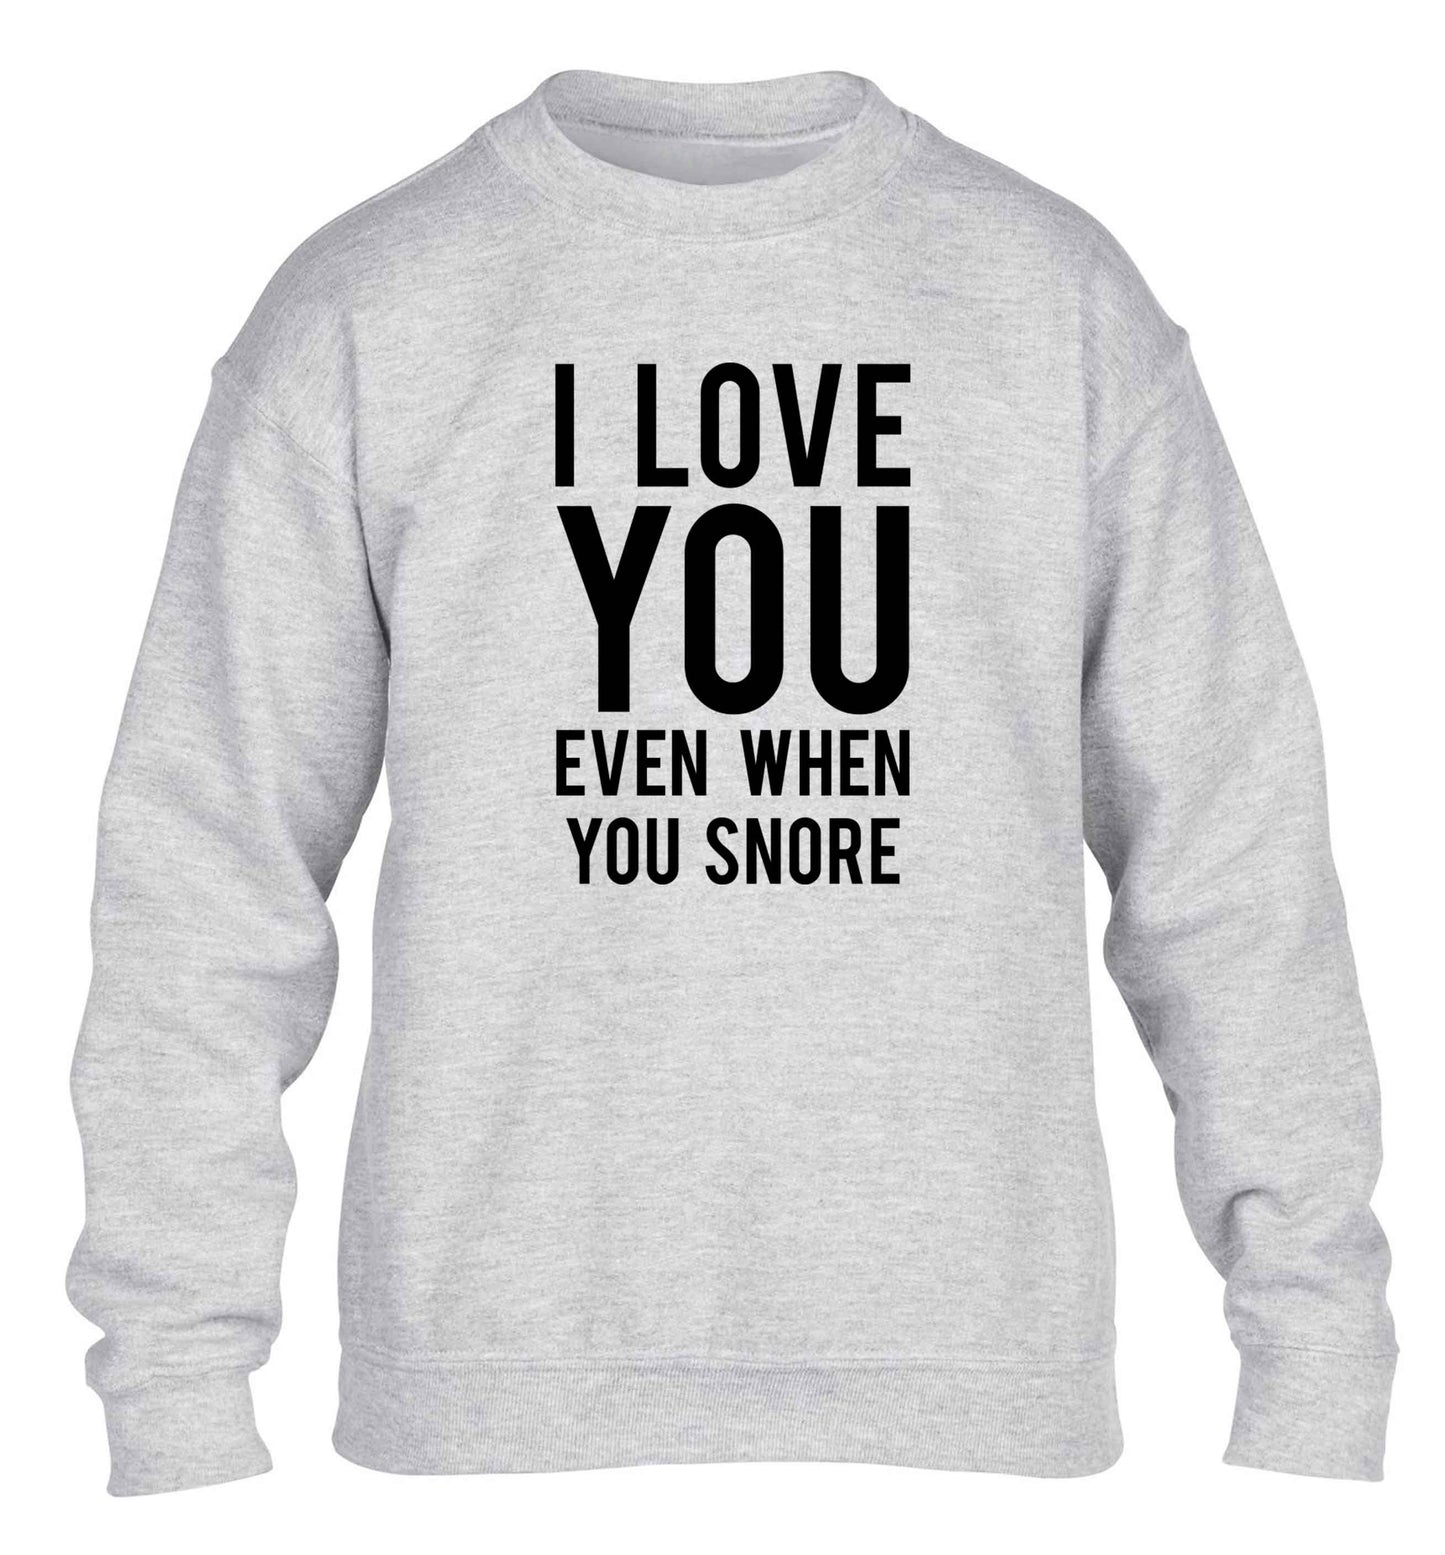 I love you even when you snore children's grey sweater 12-13 Years